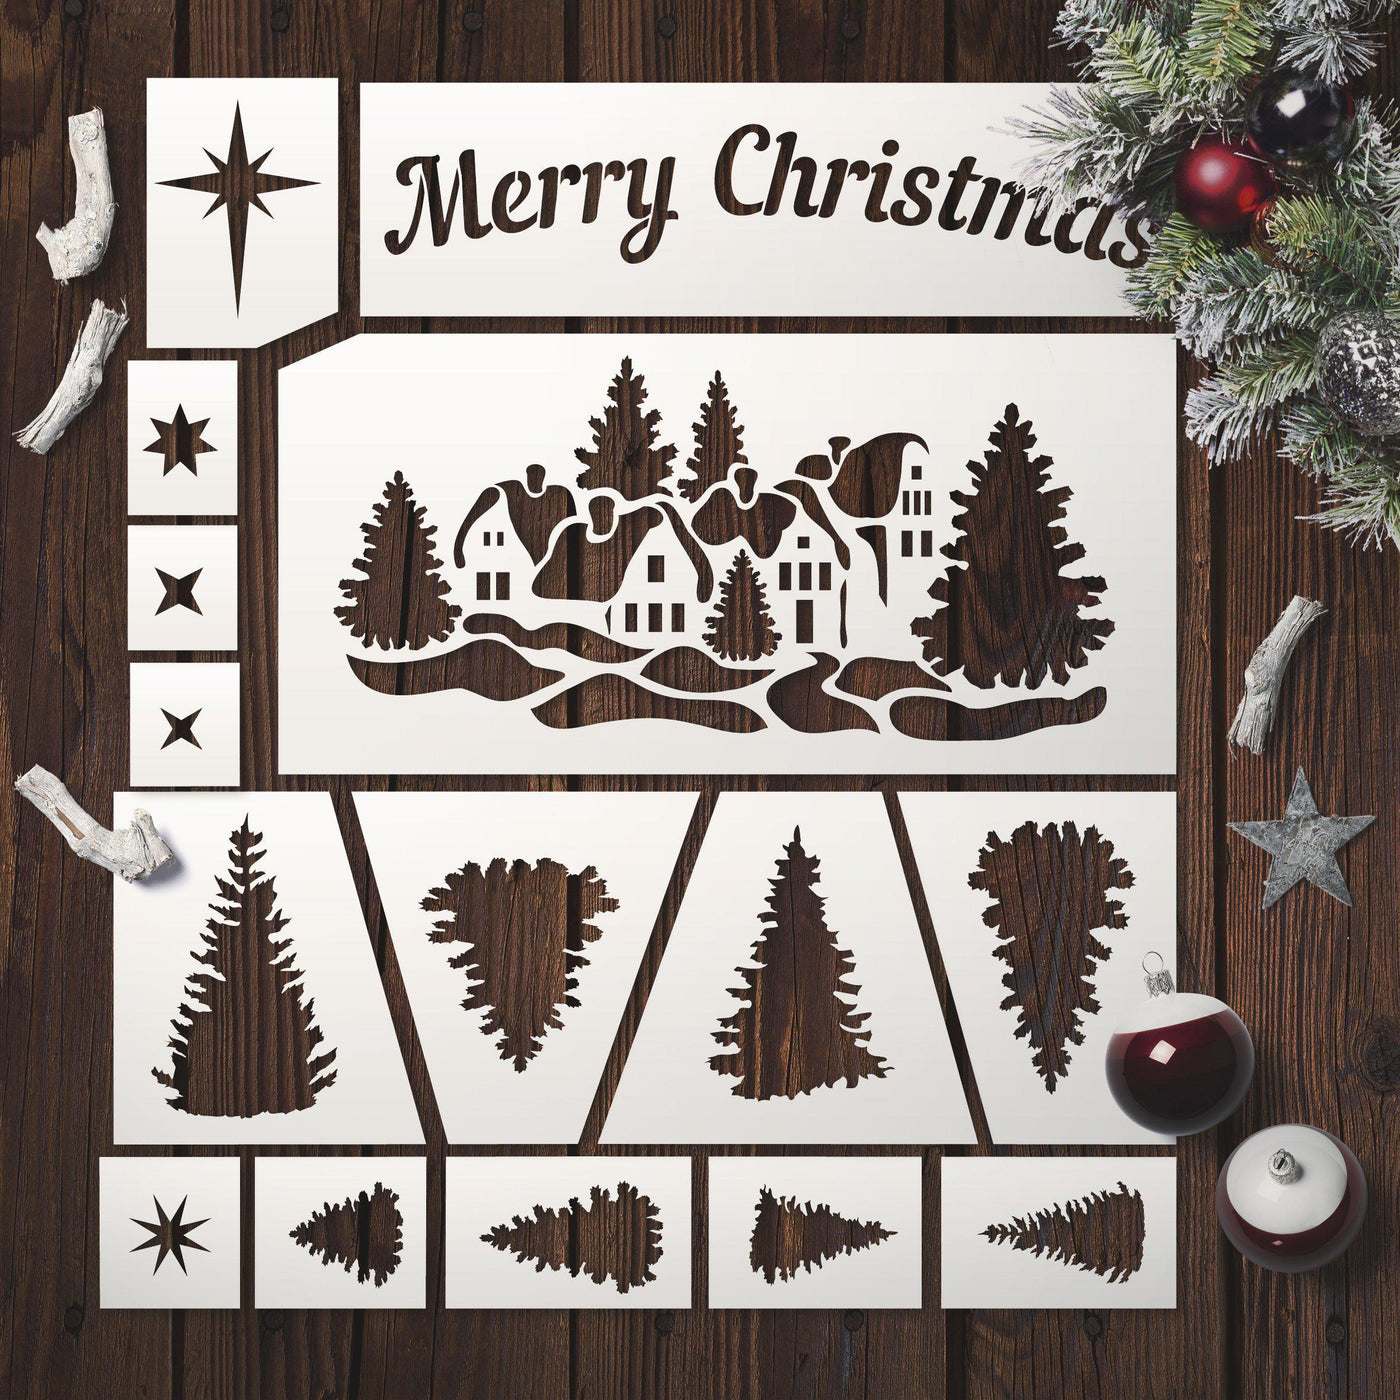 Merry Christmas Sign - Stencils Kit for Windows Decor - Christmas Sten –  StencilsLAB Wall Stencils